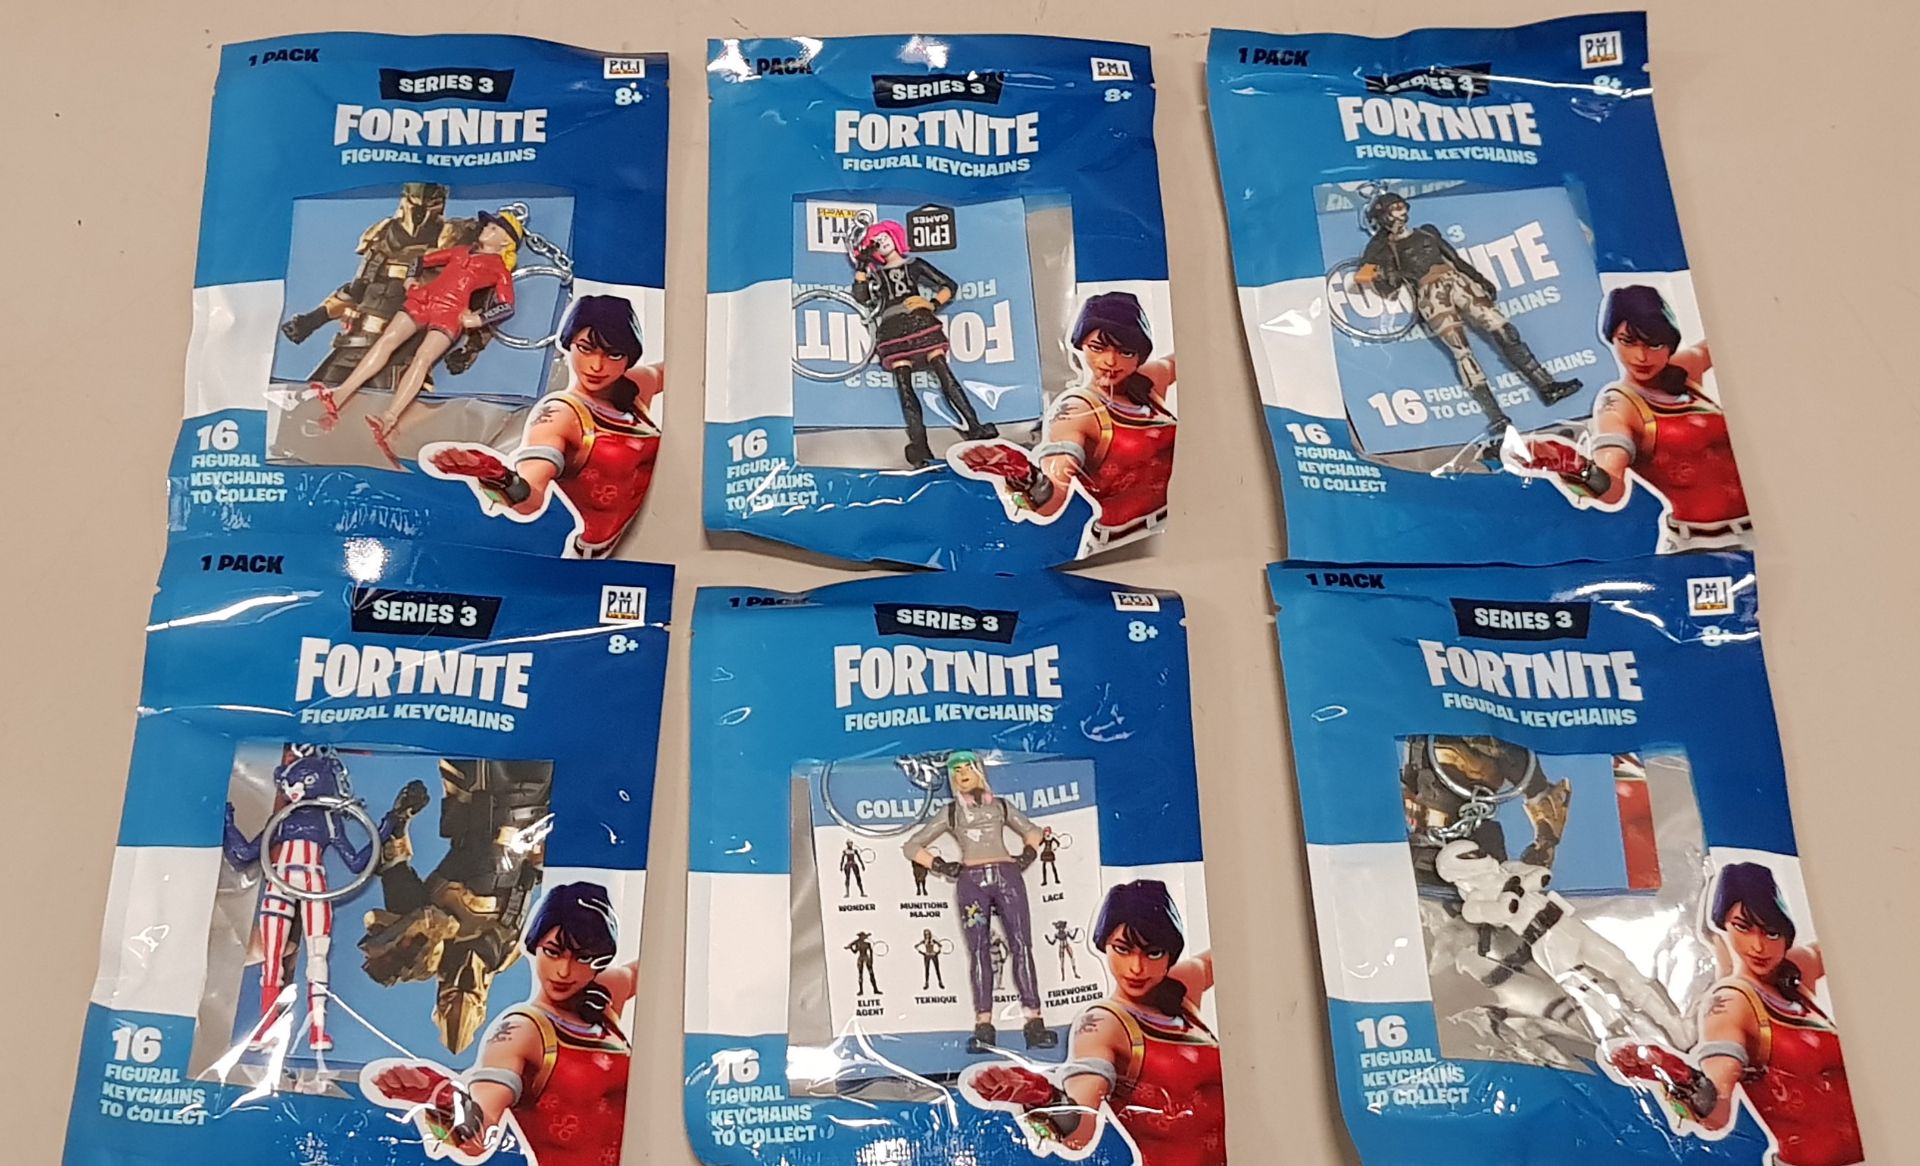 96 X BRAND NEW SERIES 3 FORTNITE 3D KEYCHAINS - CHARACTER FIGURES - IN DISPLAY BOX OF 24 PCS - IN - Image 4 of 4